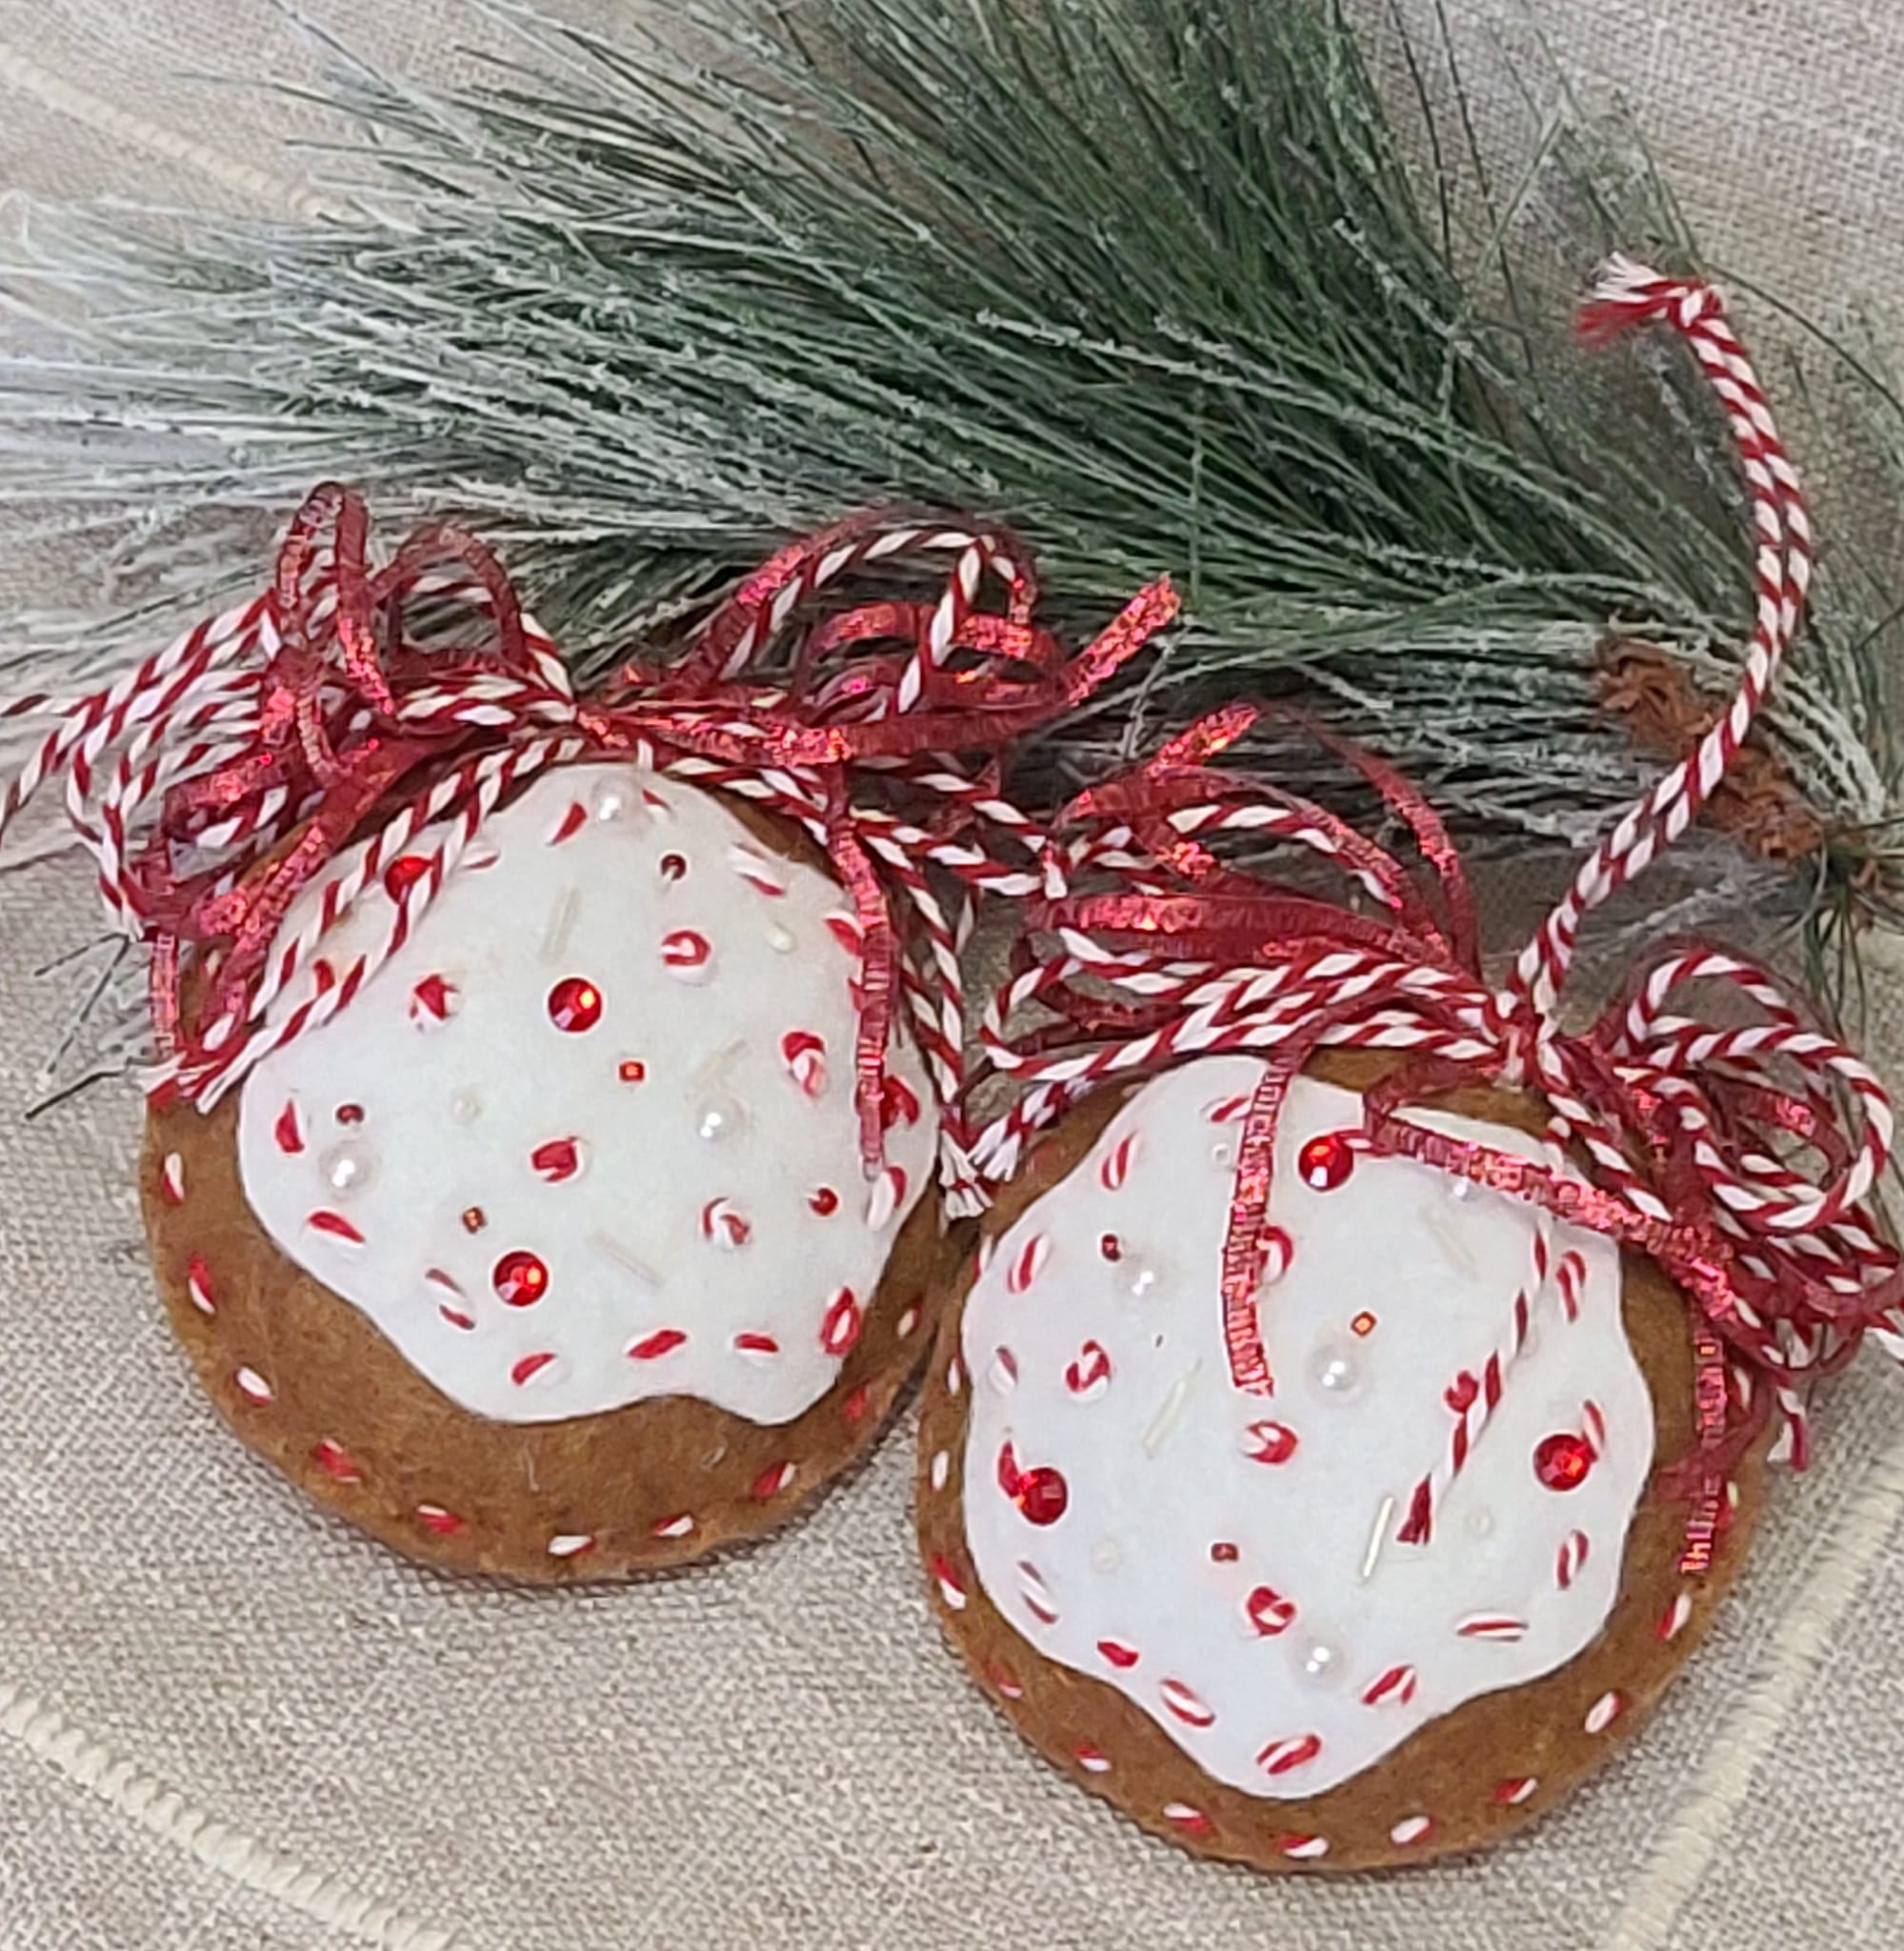 Gingerbread felt and white icing ornament candy cane beading